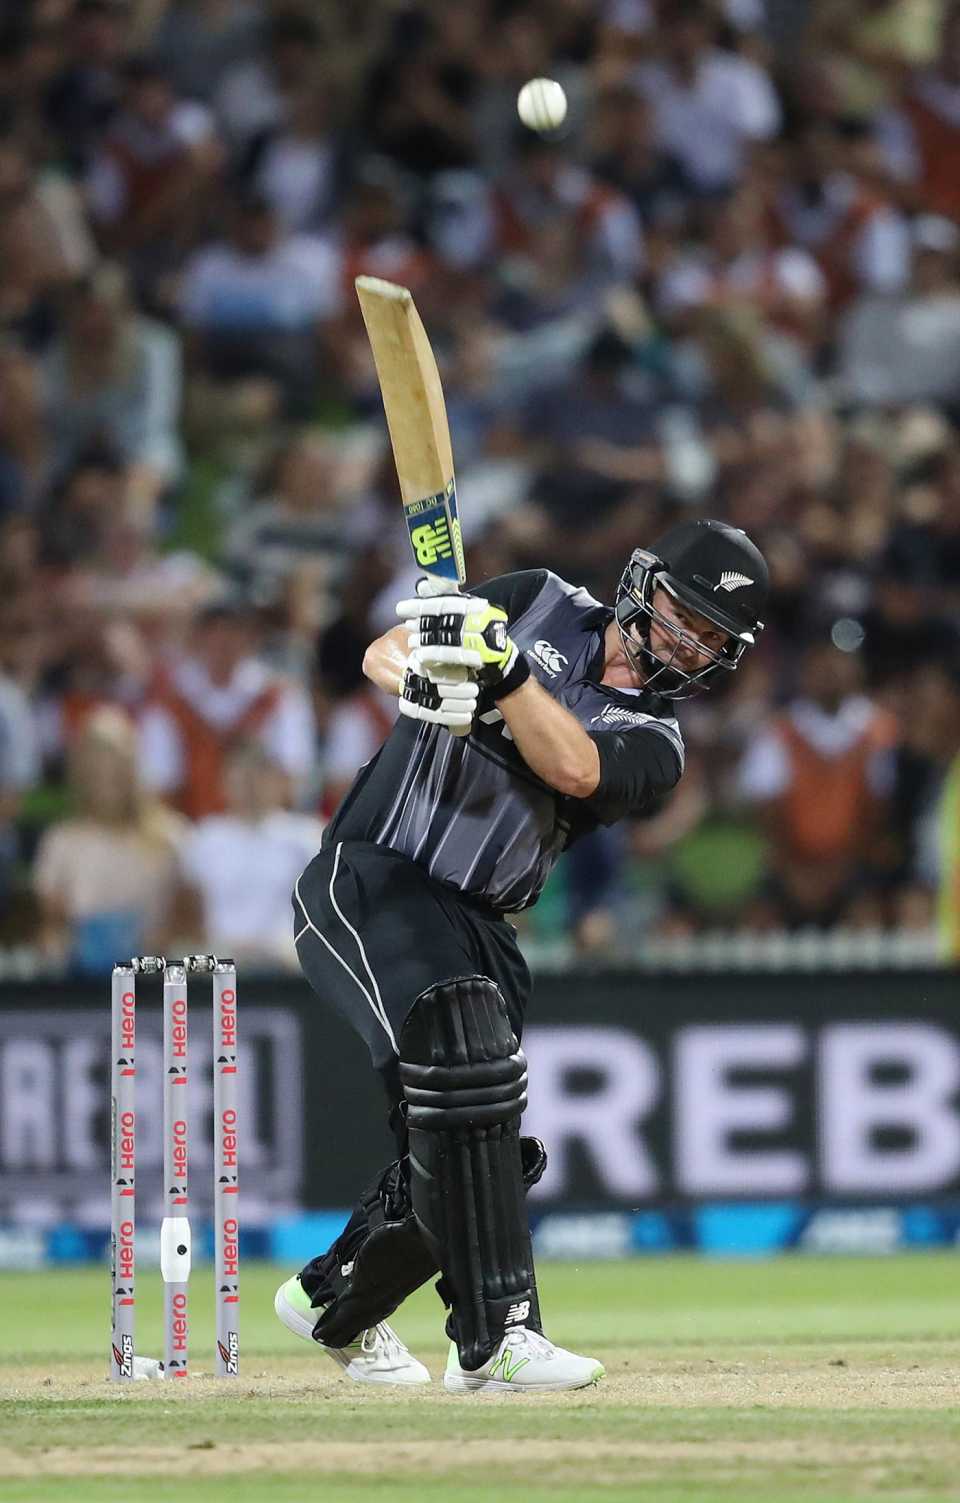 Colin Munro goes aerial